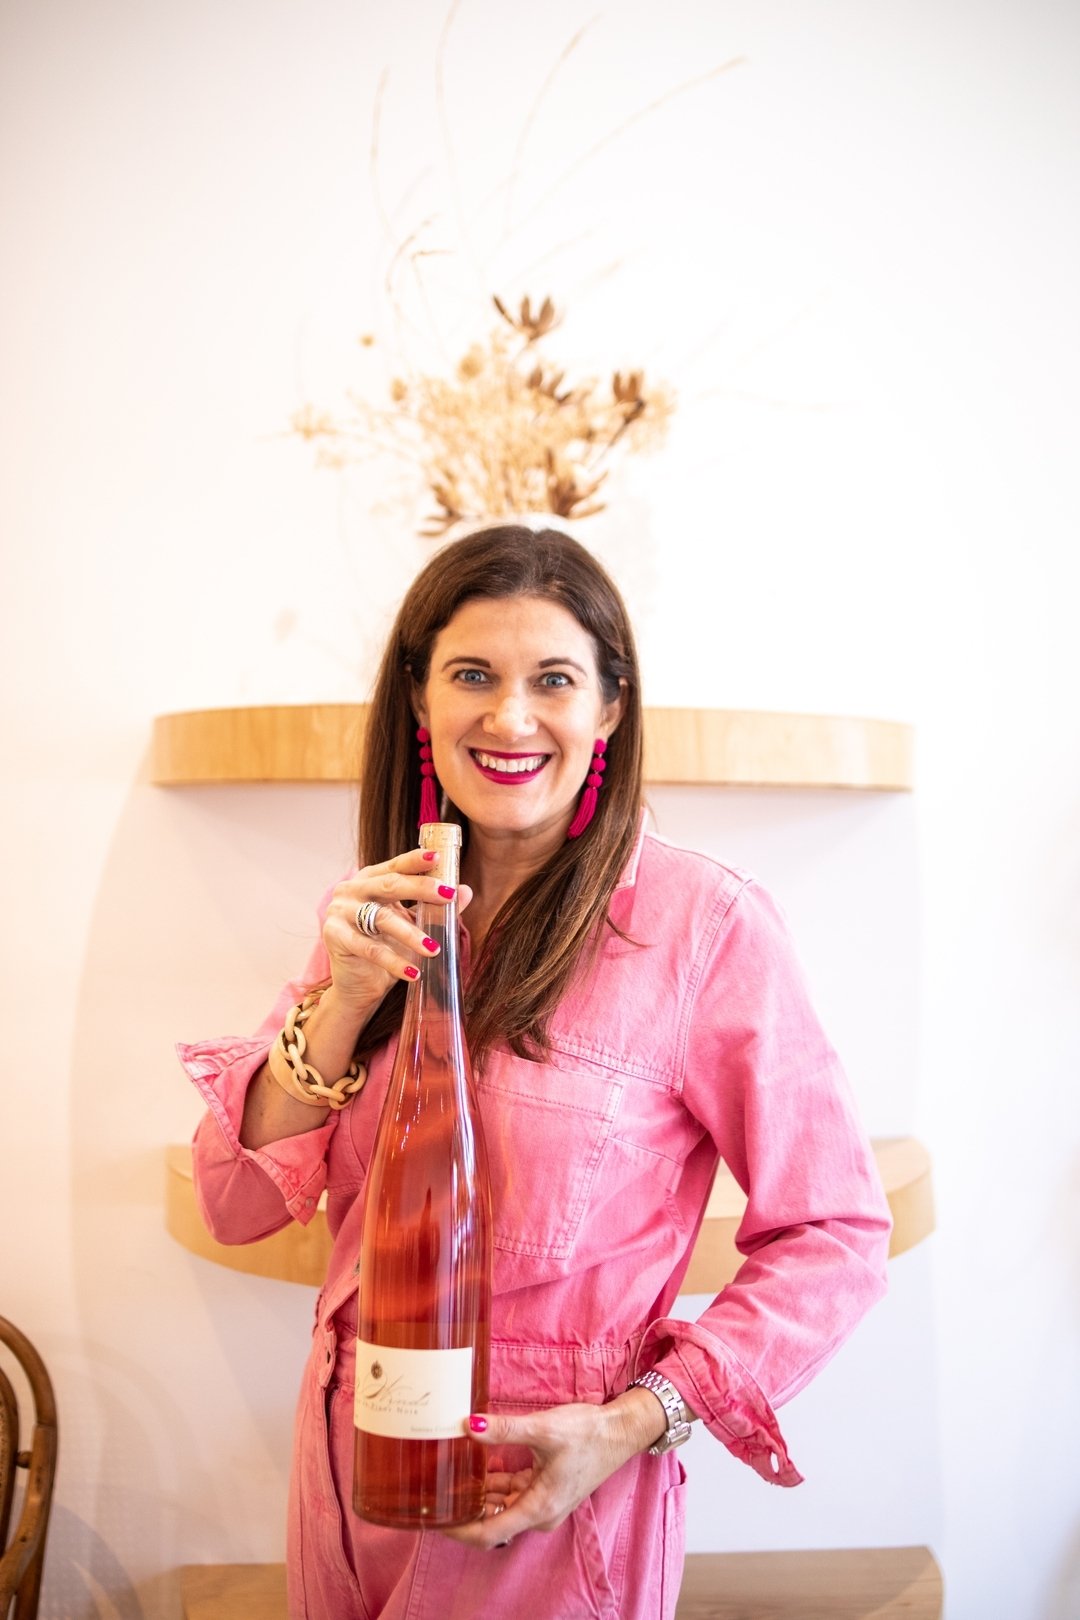 Join us for an enchanting evening with Emily Martin of The JetSetting Fashionista and Emily Martin Events at Healdsburg's latest gastronomic gem, The Matheson. Experience the launch of the exquisite Mascarin Wines launch at our Winemaker Dinner, host